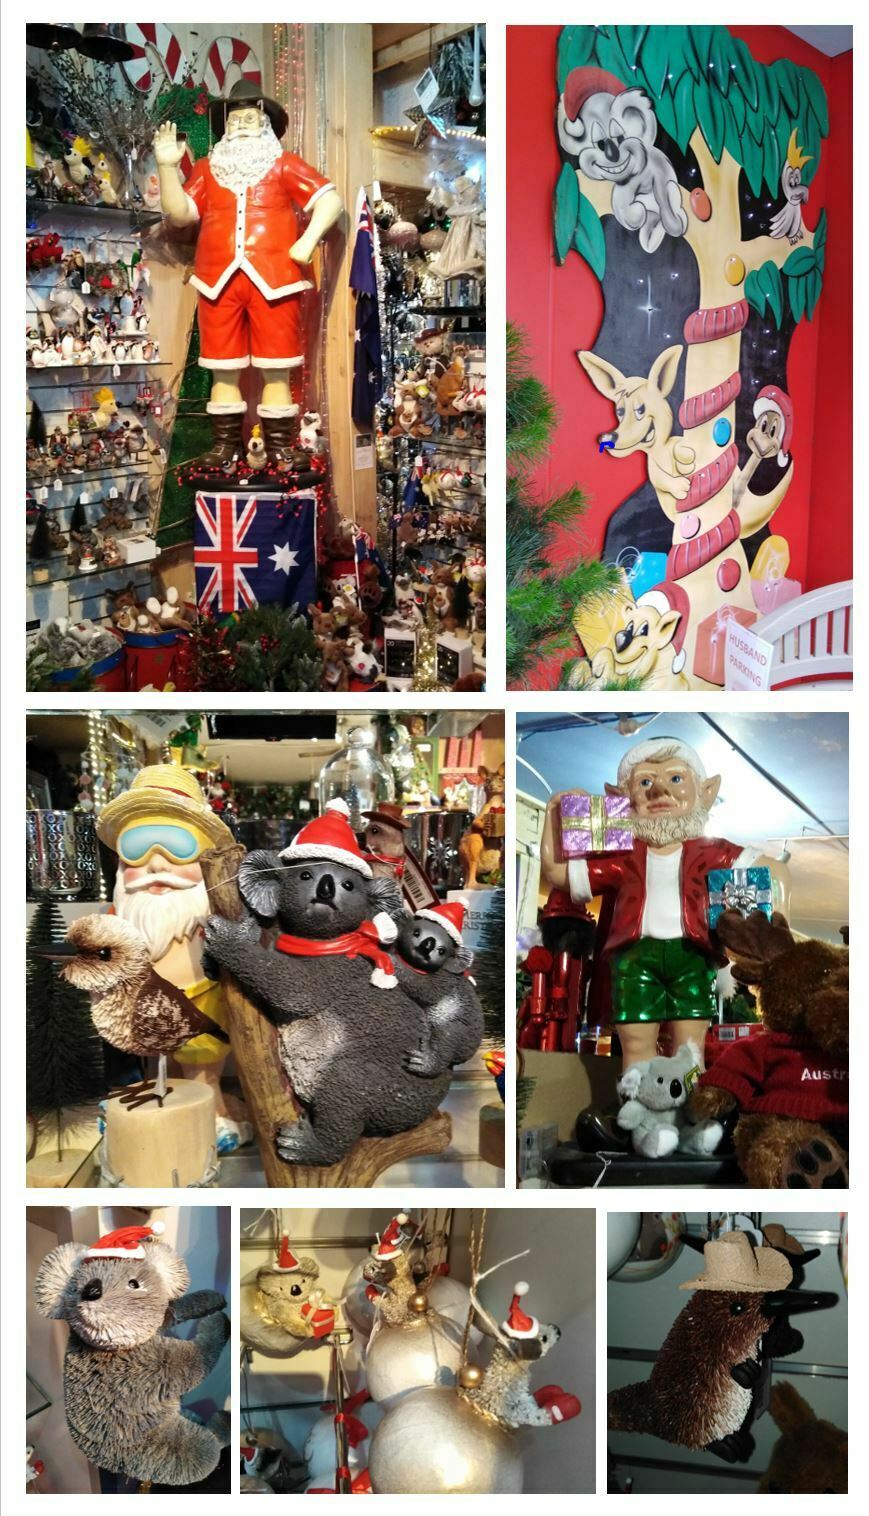 Collage of Aussie themed decorations at Santa's Place